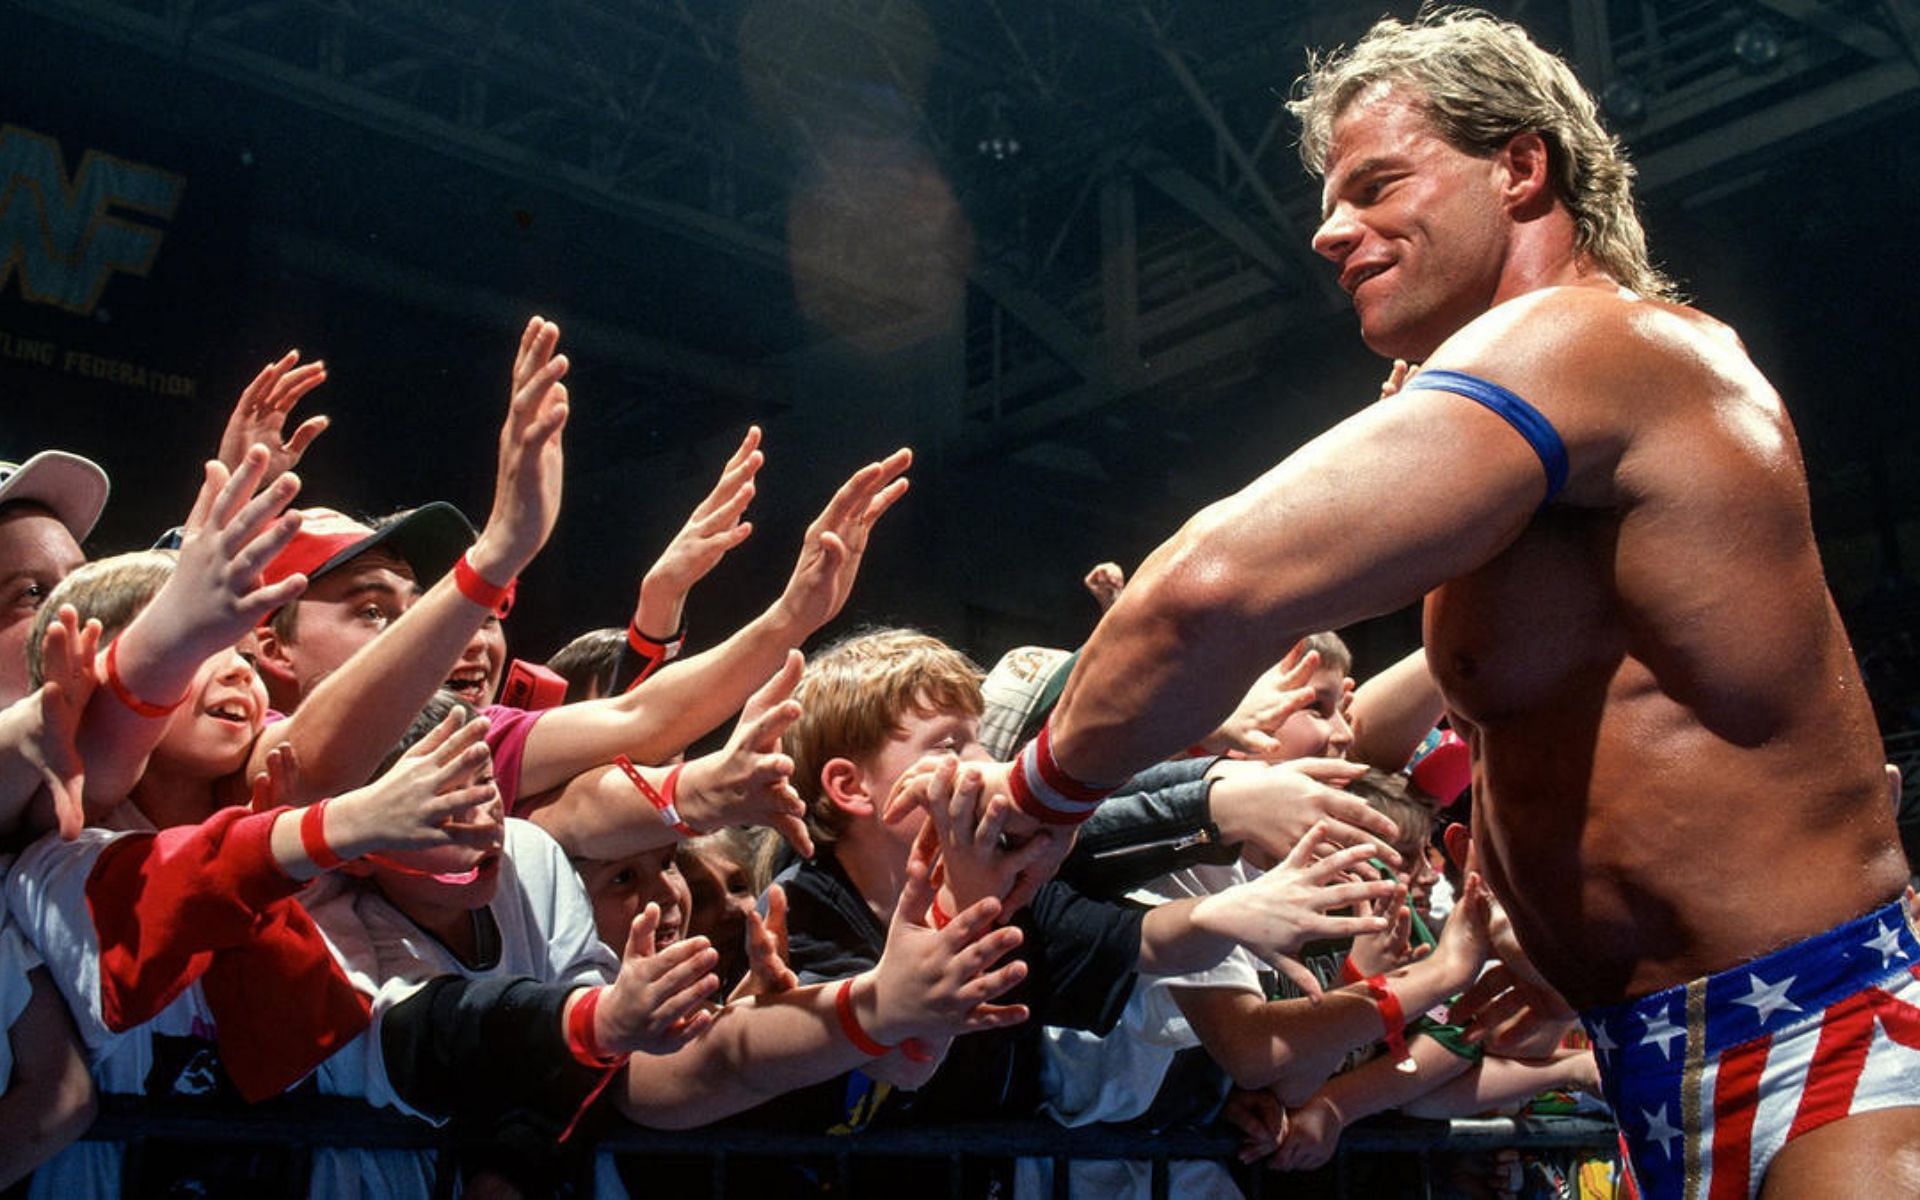 The Narcissist Lex Luger was once one of the biggest names in professional wrestling.